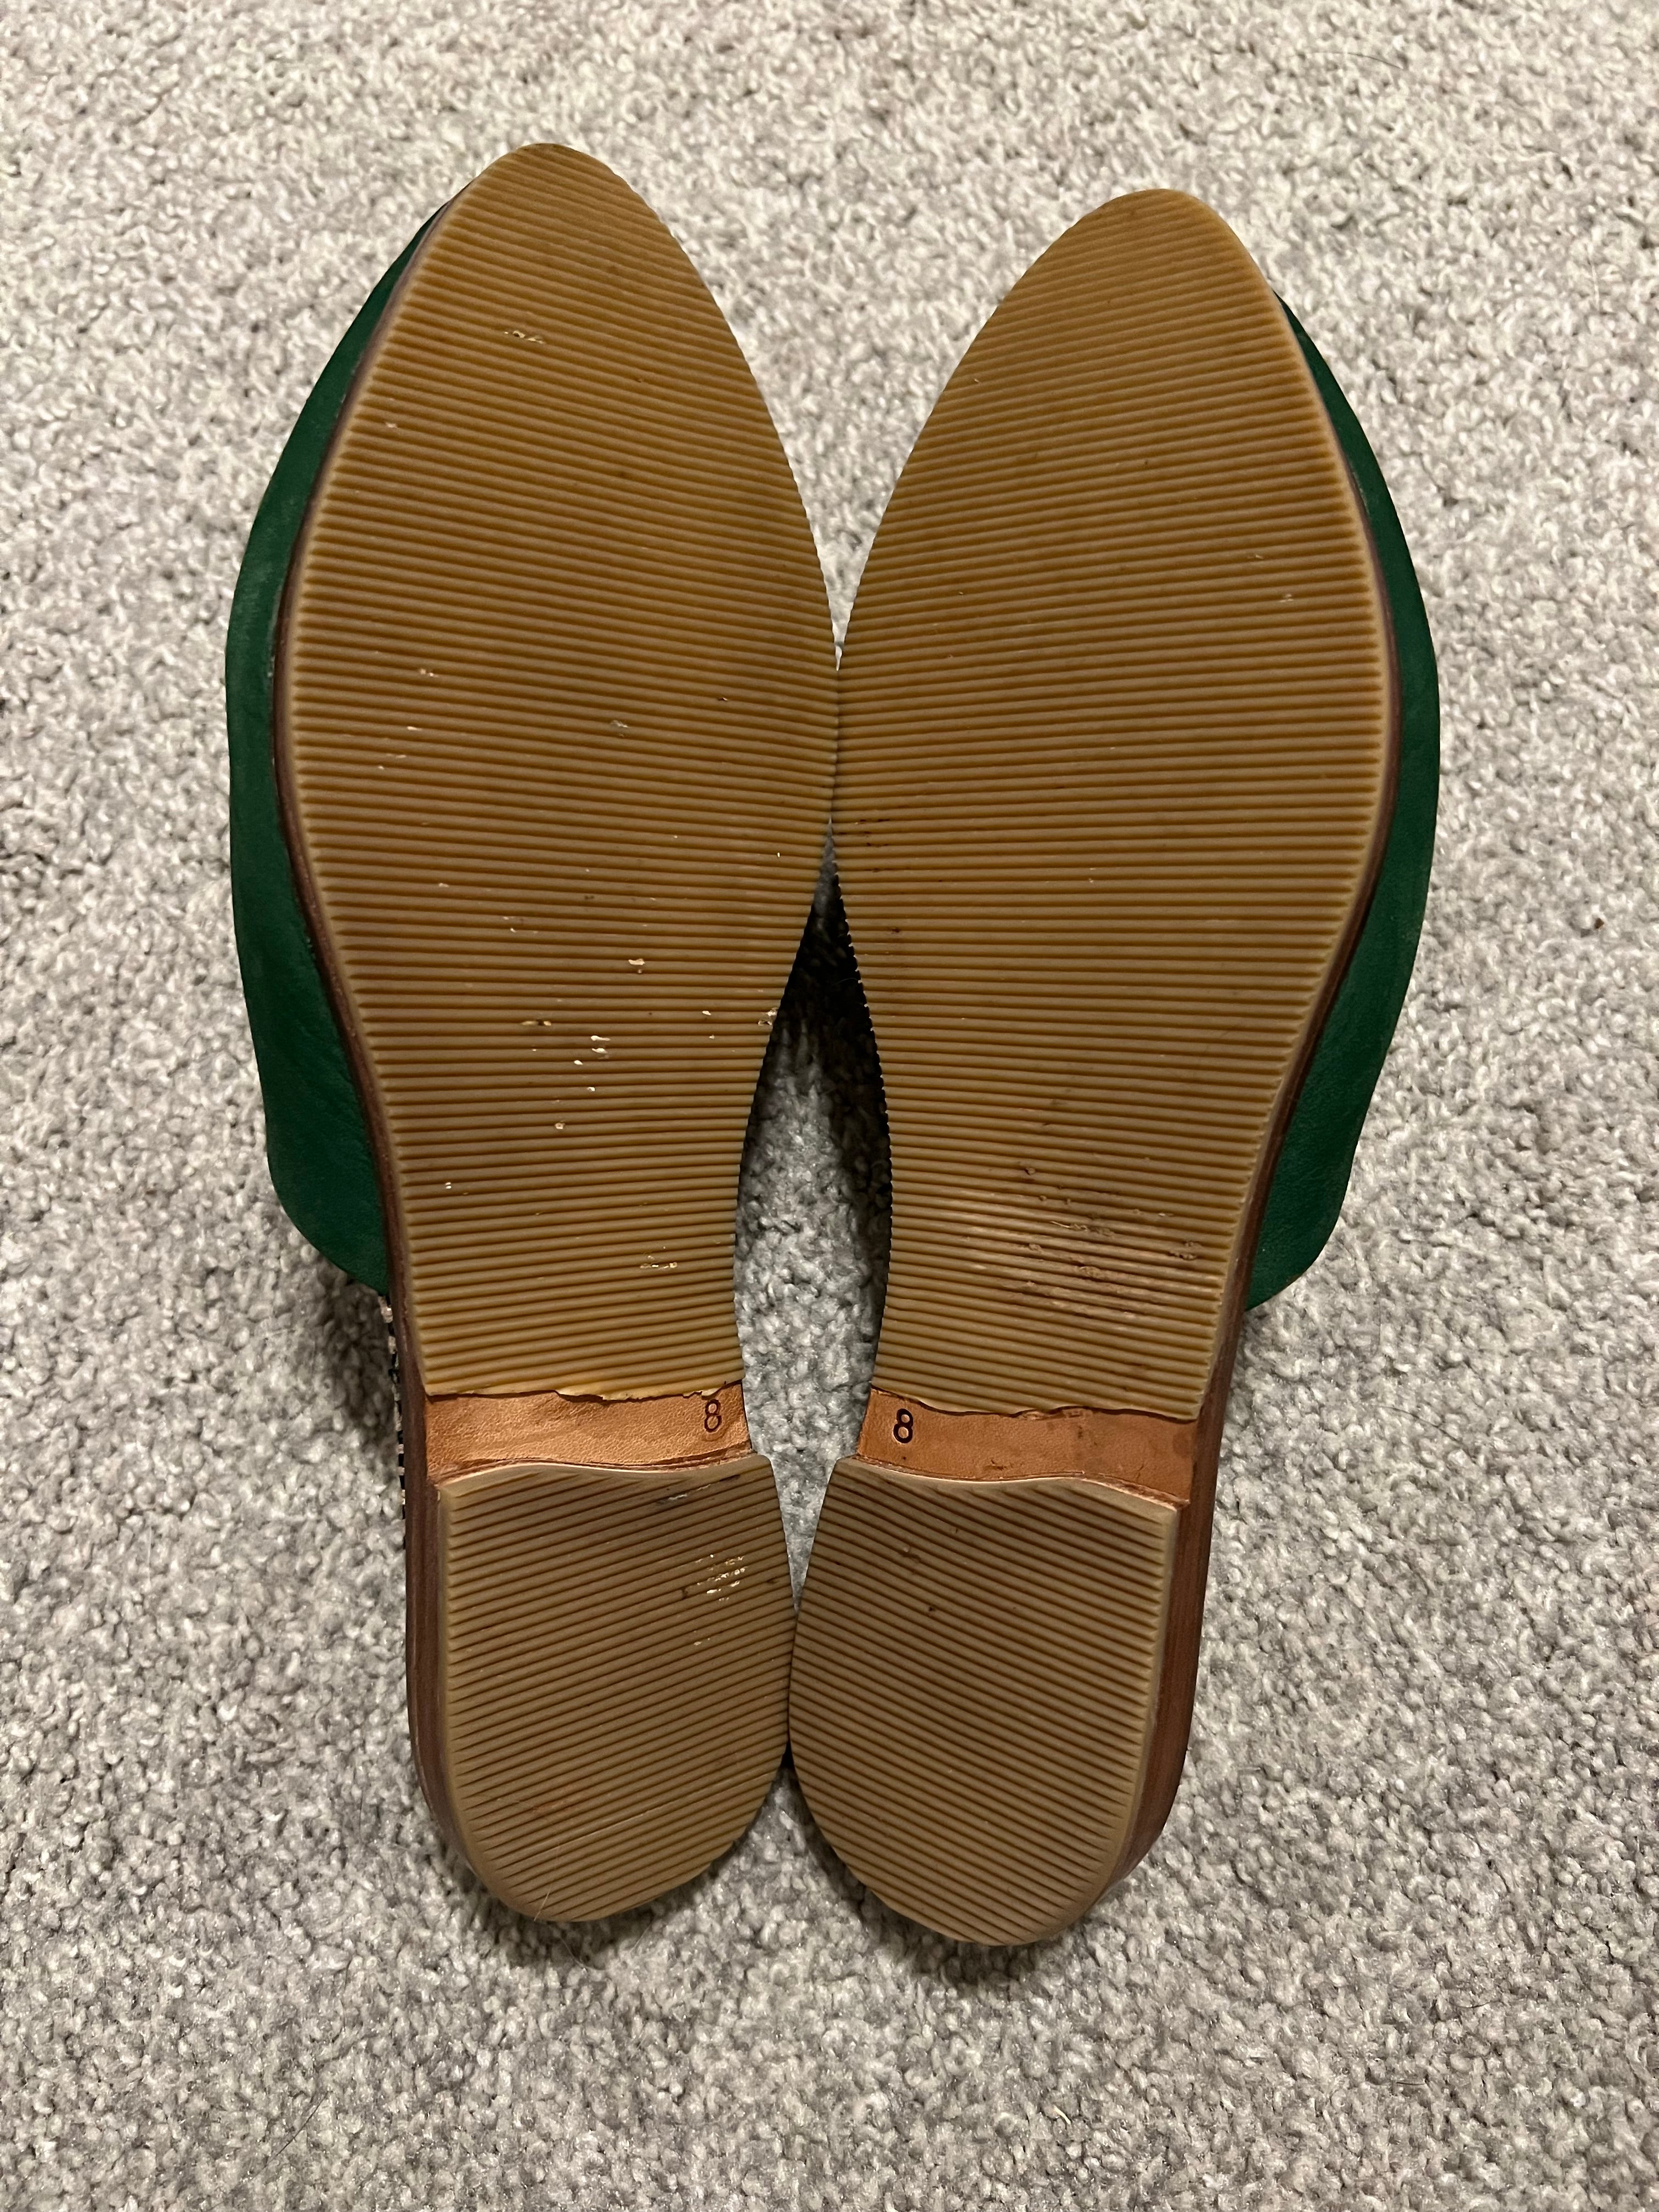 Limited Edition Lili in Kelly Green size 8 - Pre-loved